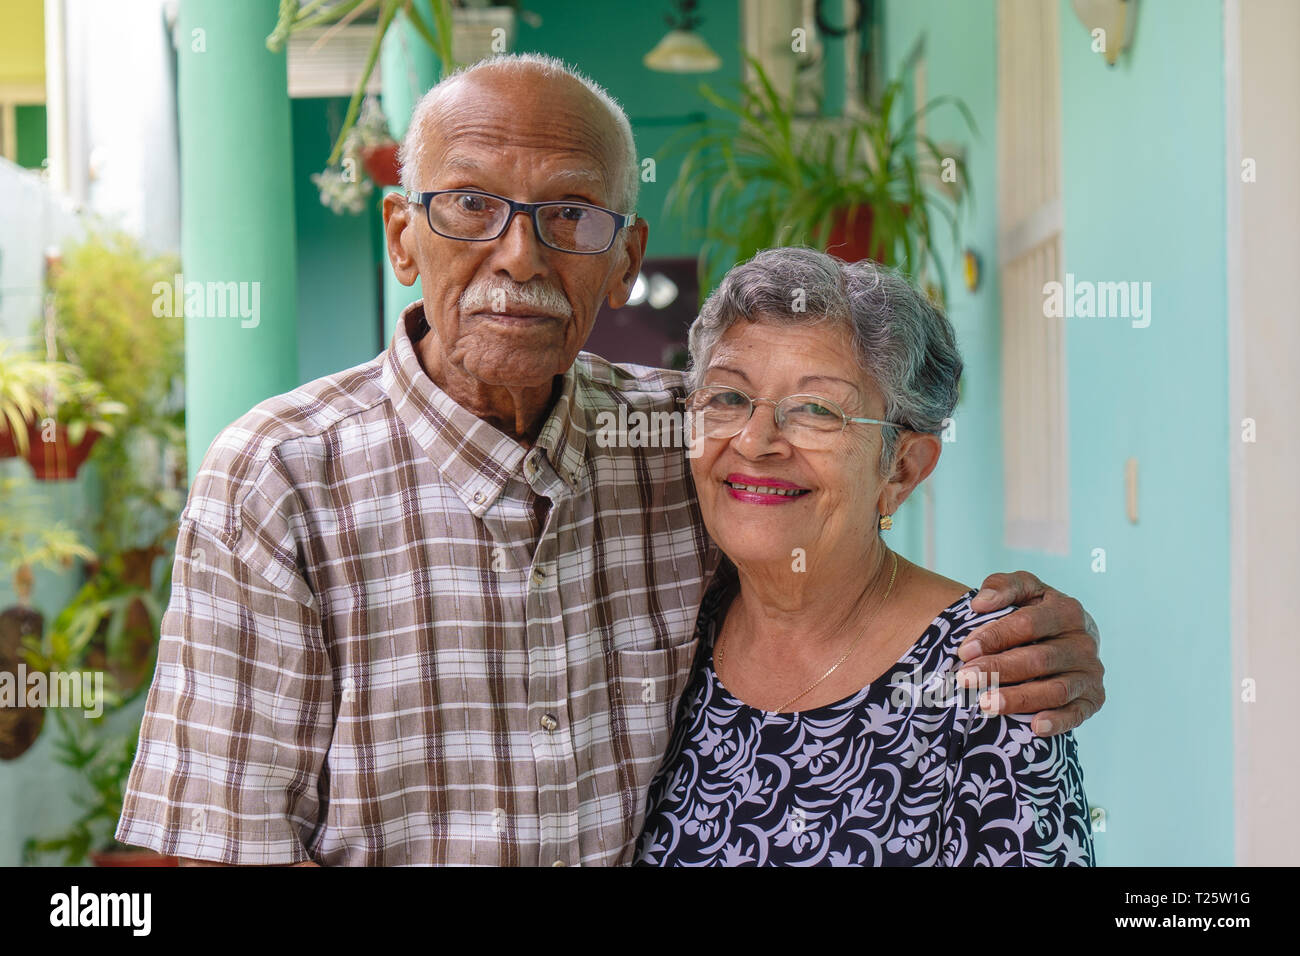 An smiling elderly couple, both wearing glasses. Stock Photo